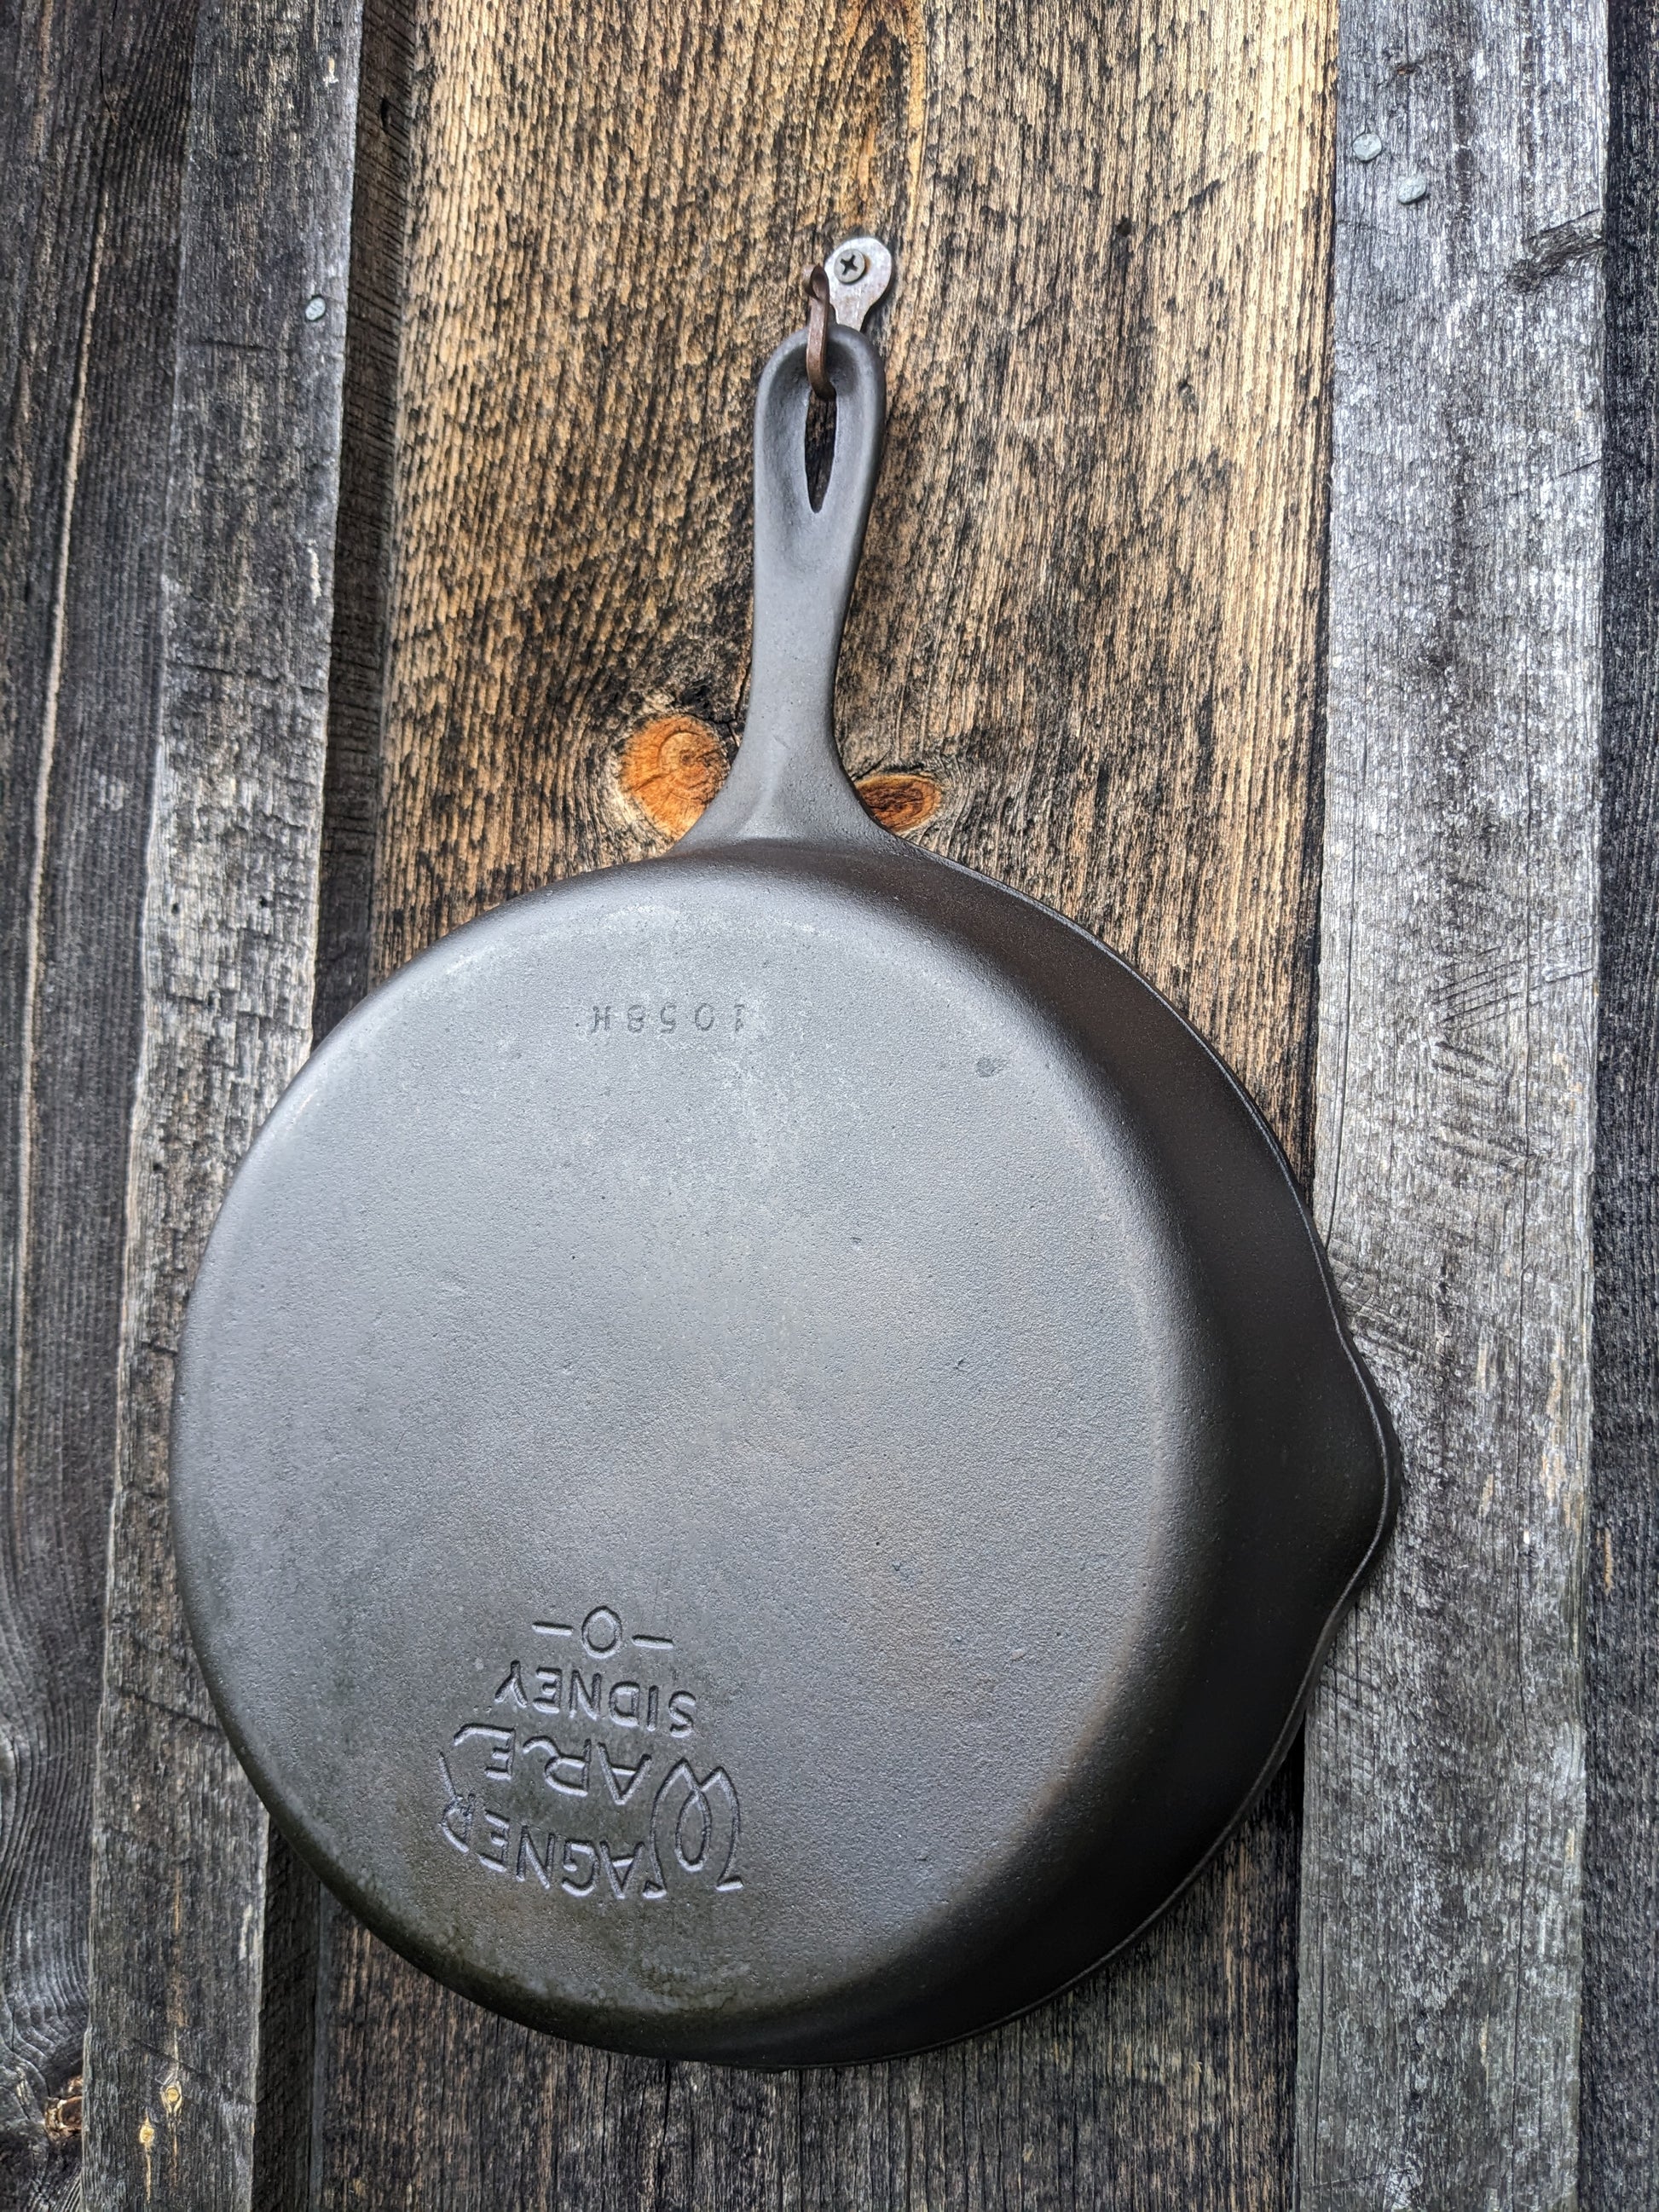 Cast Iron Cookware Wagner Ware GHC USA 8 Round Skillet (#04